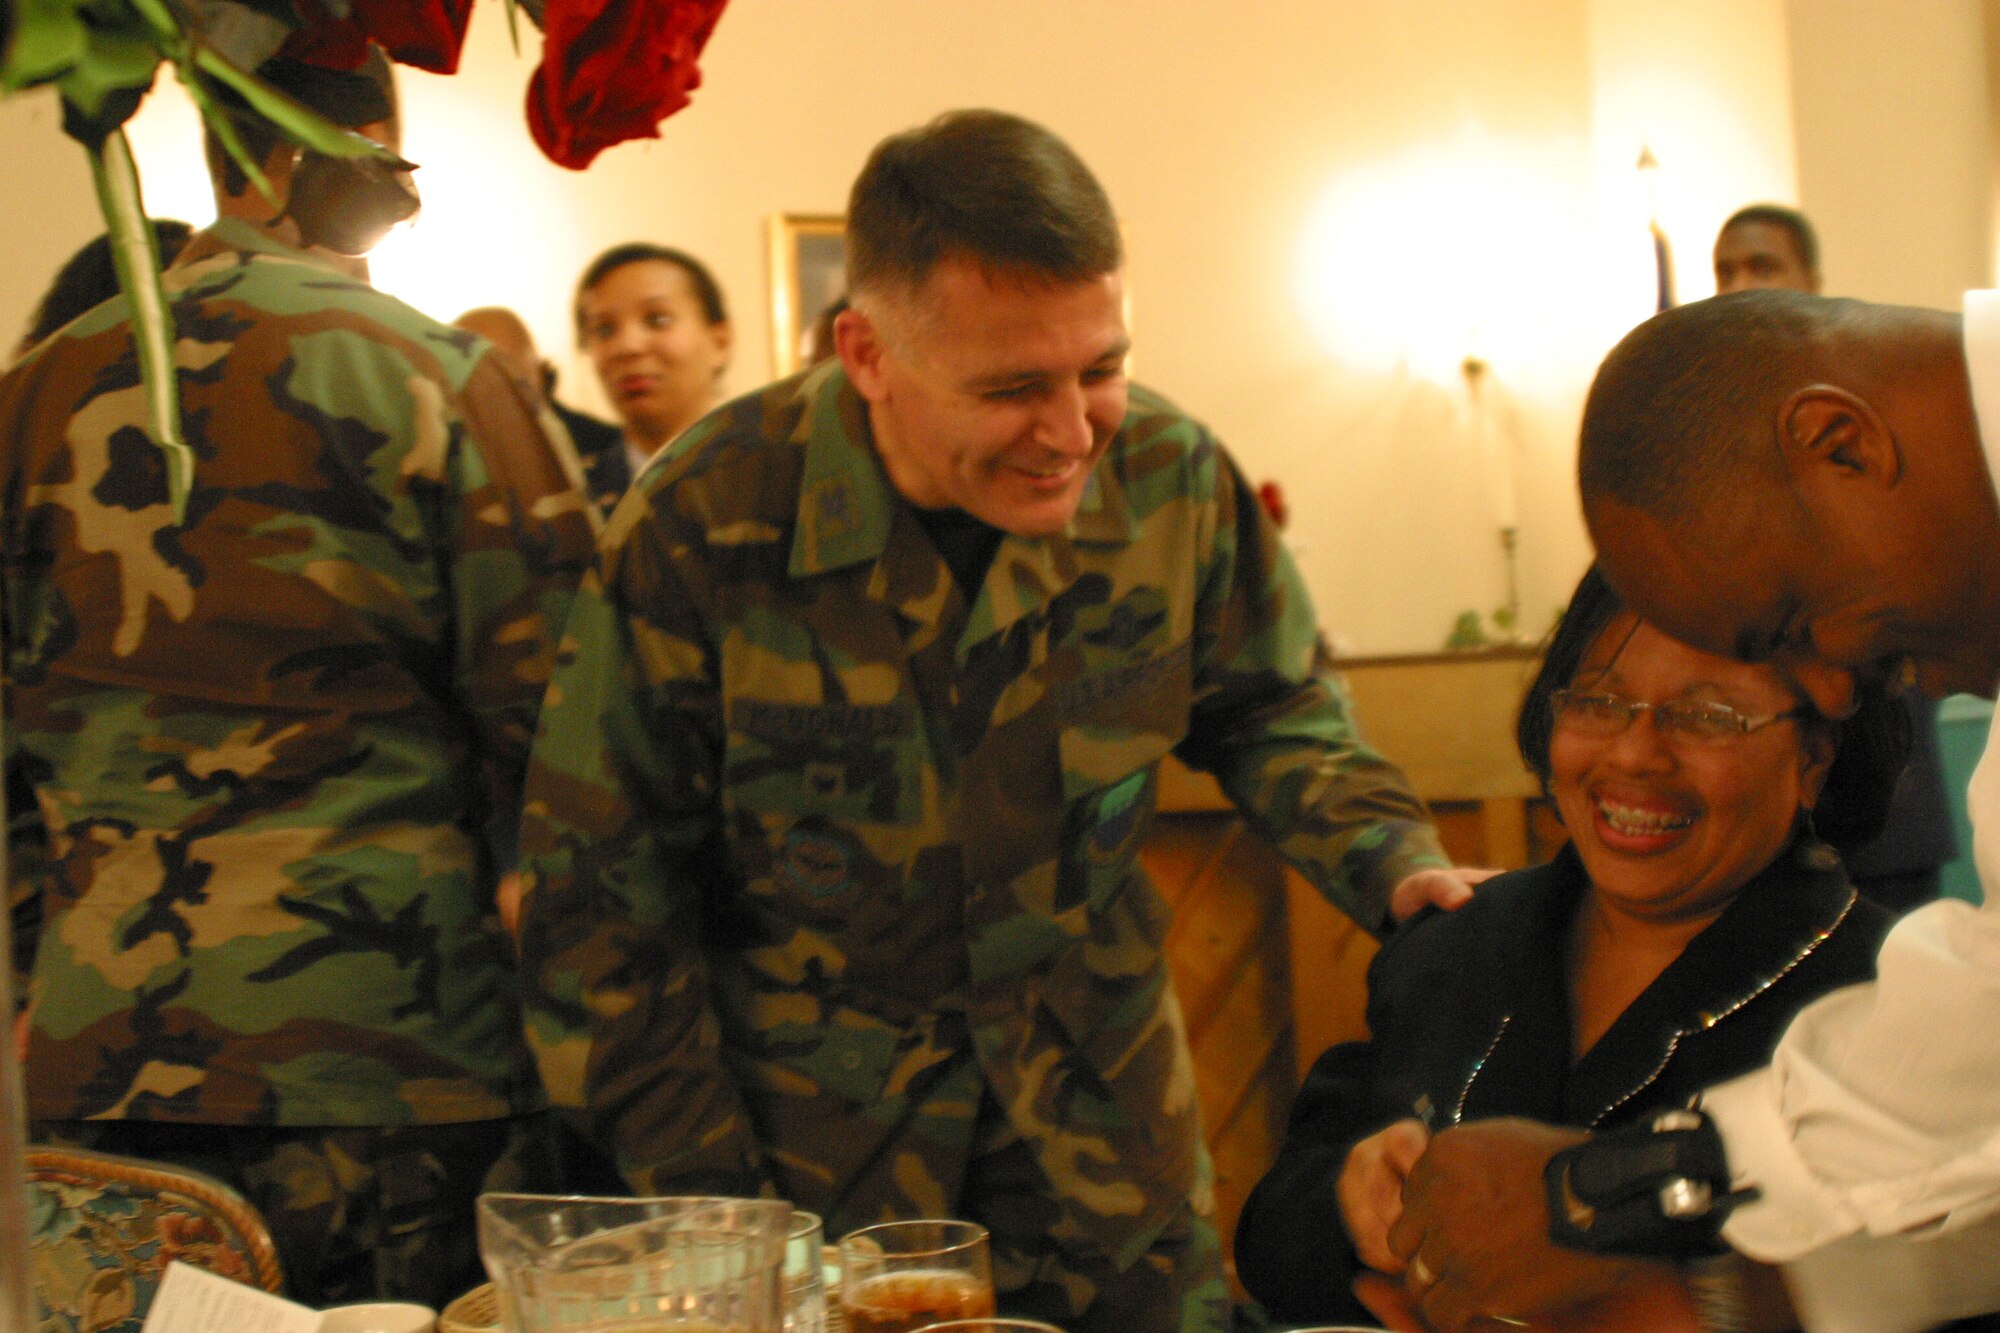 Col. John McDonald, 43rd Airlift Wing Vice Commander, applauds Natalie Boykin, 43rd Services Squadron, for her continuous volunteer efforts with the African American Heritage Committee at the committee's luncheon Tuesday.